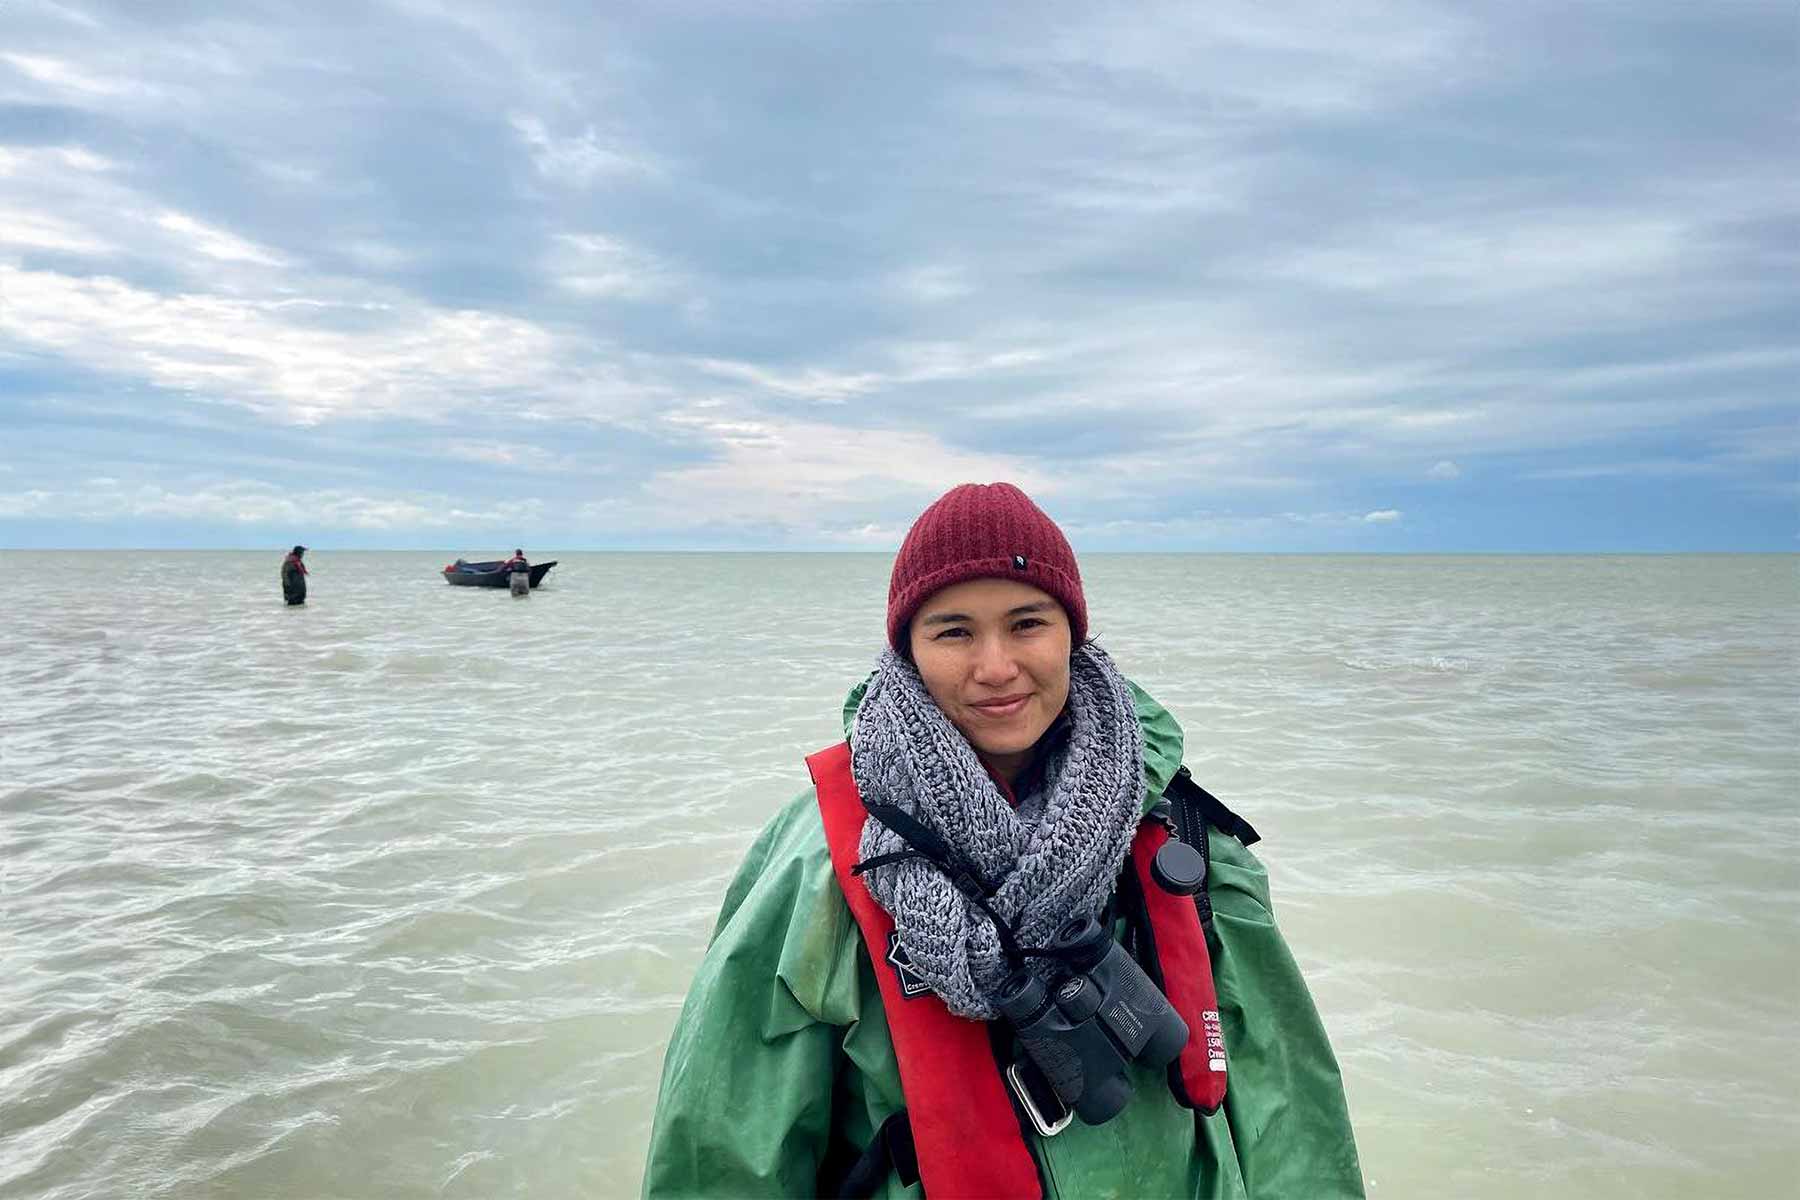 Assel Baimukanova works at at the Institute of Biology and Hydrogeology while pursuing a PhD majoring in ichthyology. Photo courtesy of A. Baimukanova.